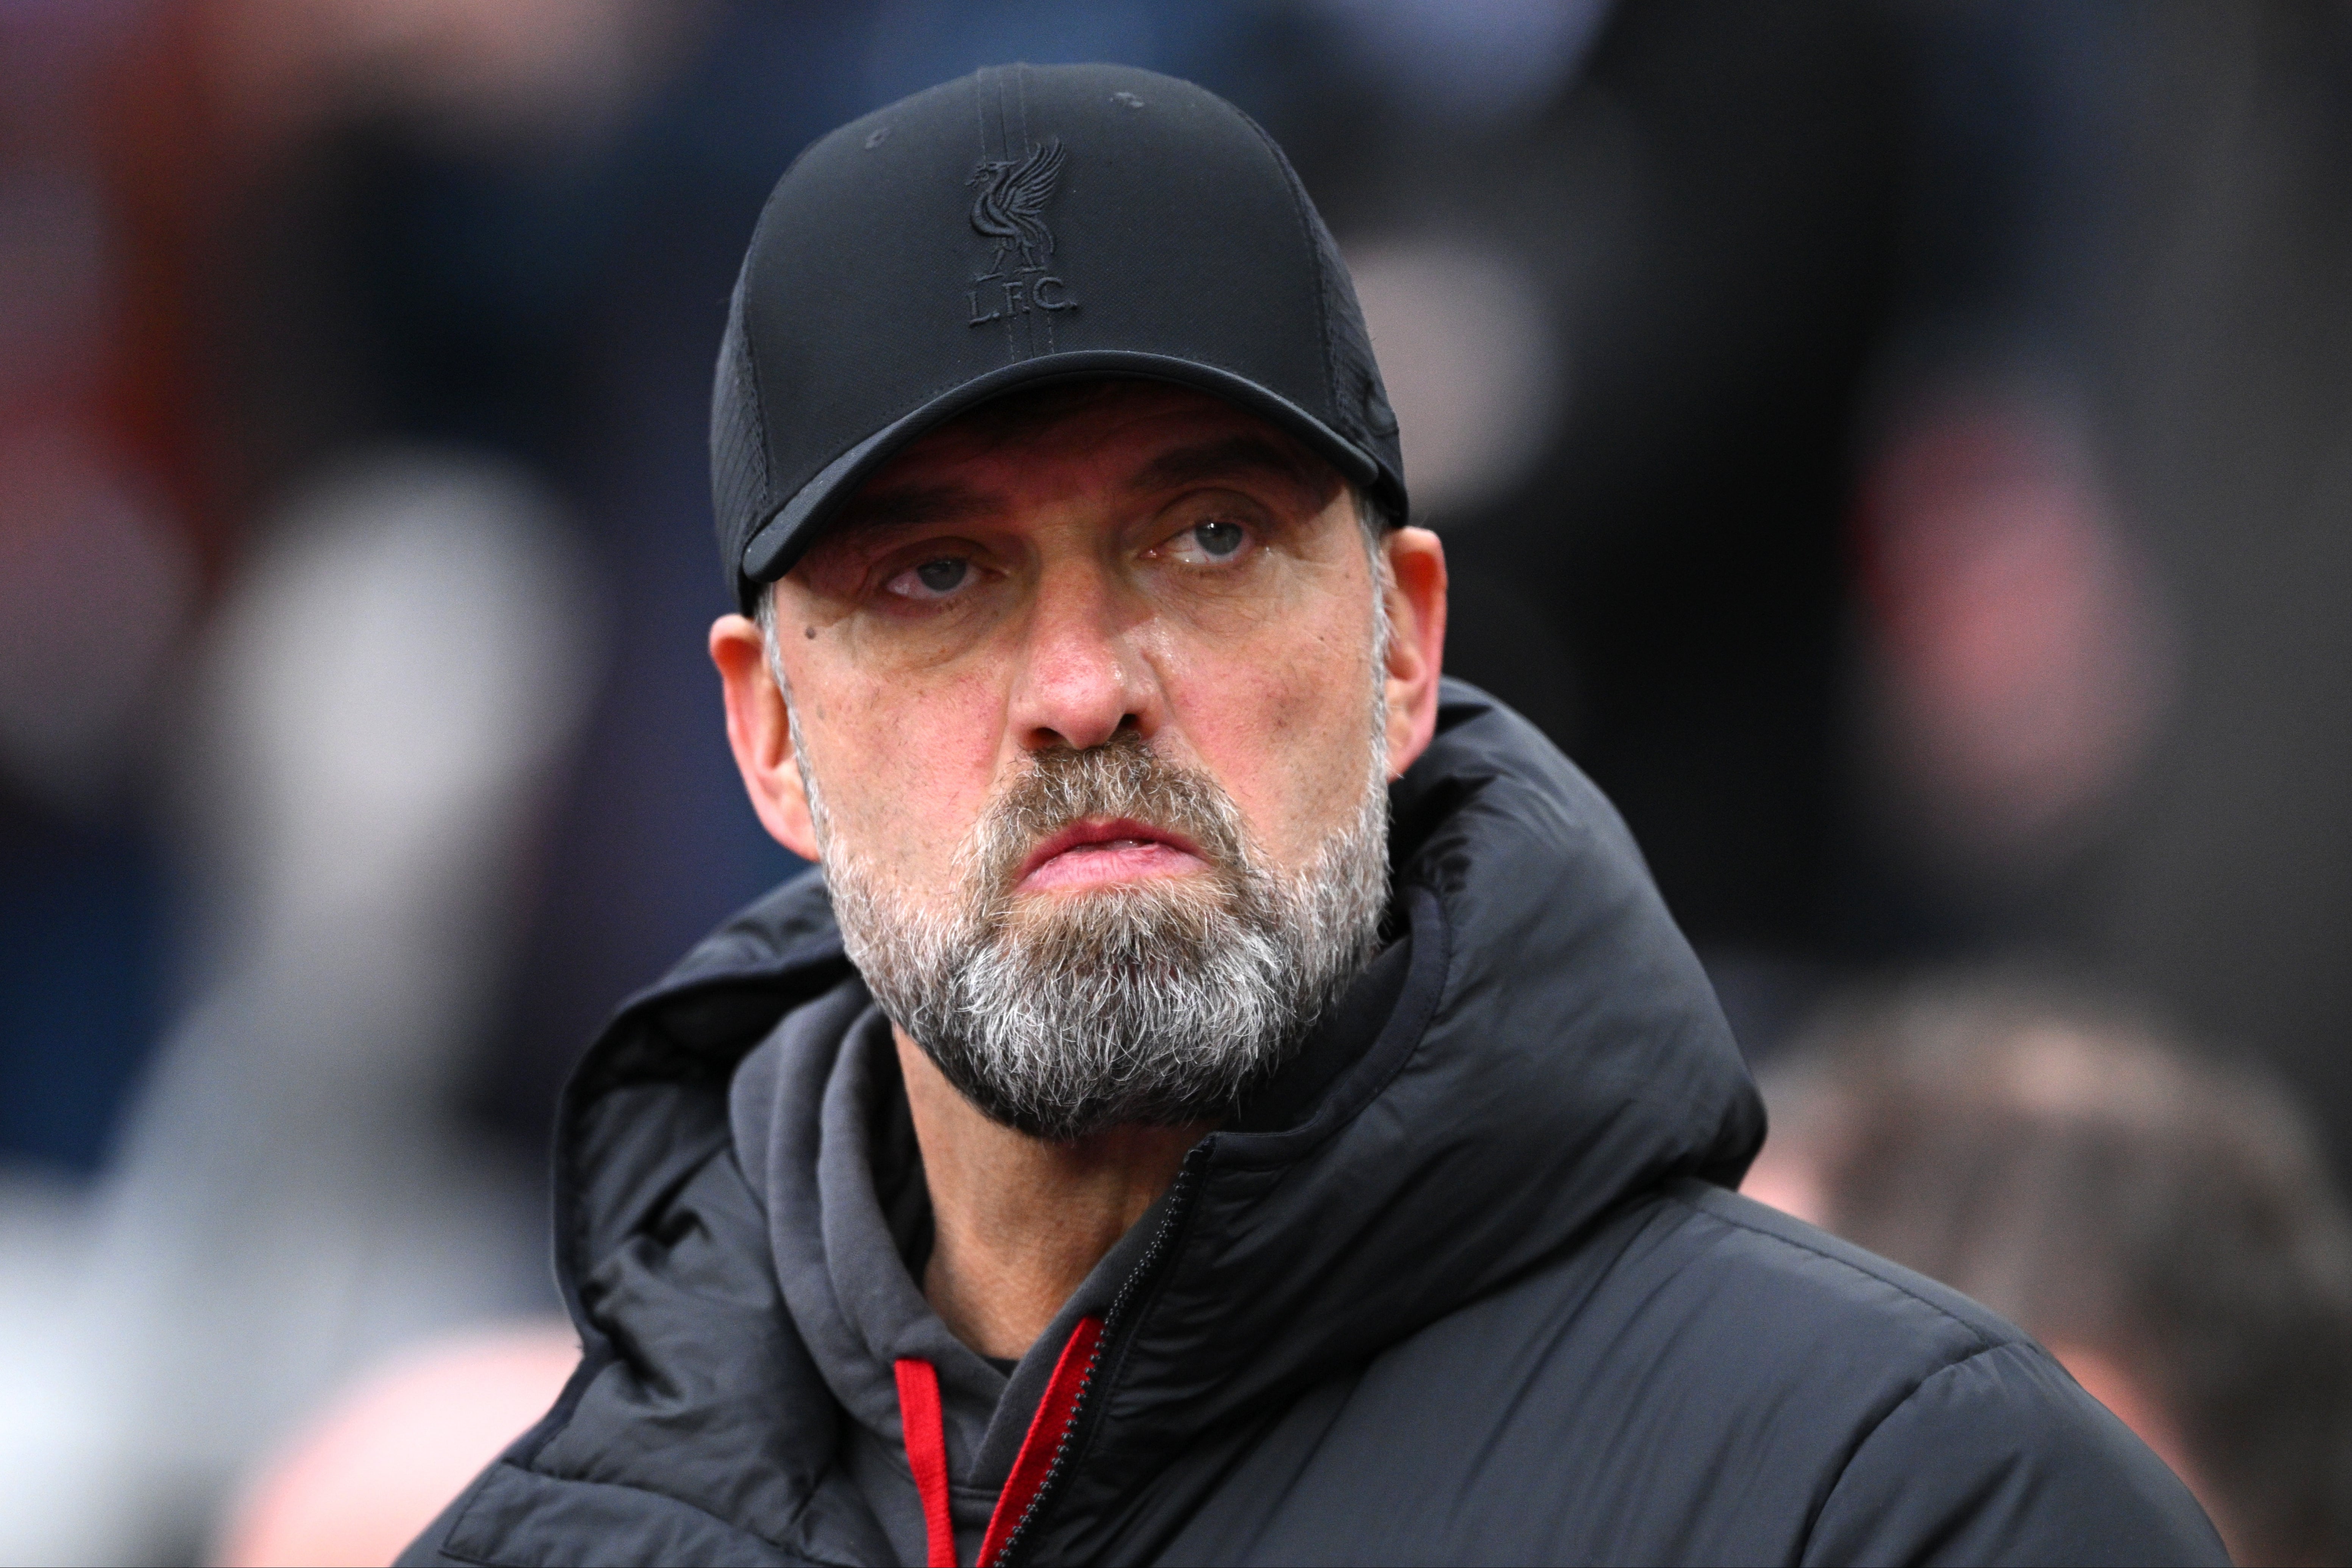 Jurgen Klopp is at risk of a touchline ban for his Anfield swansong